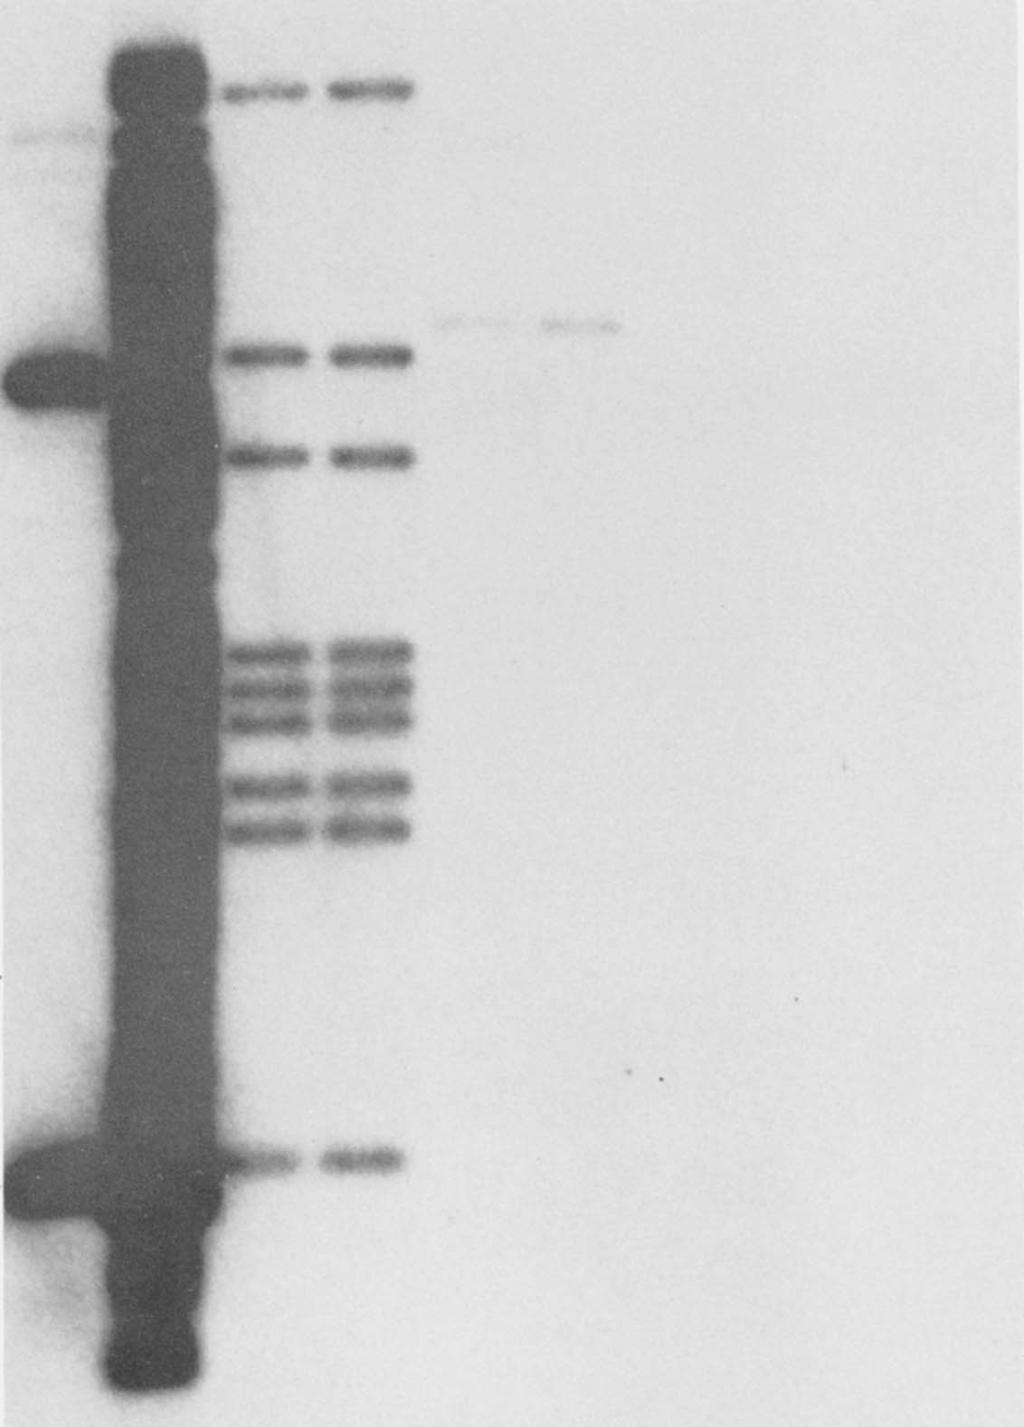 Repetitive DNA element in B. pertussis 2299 AU 23.1 - A B C D E F G 9.4-6.5-4.4. 2.0 1.